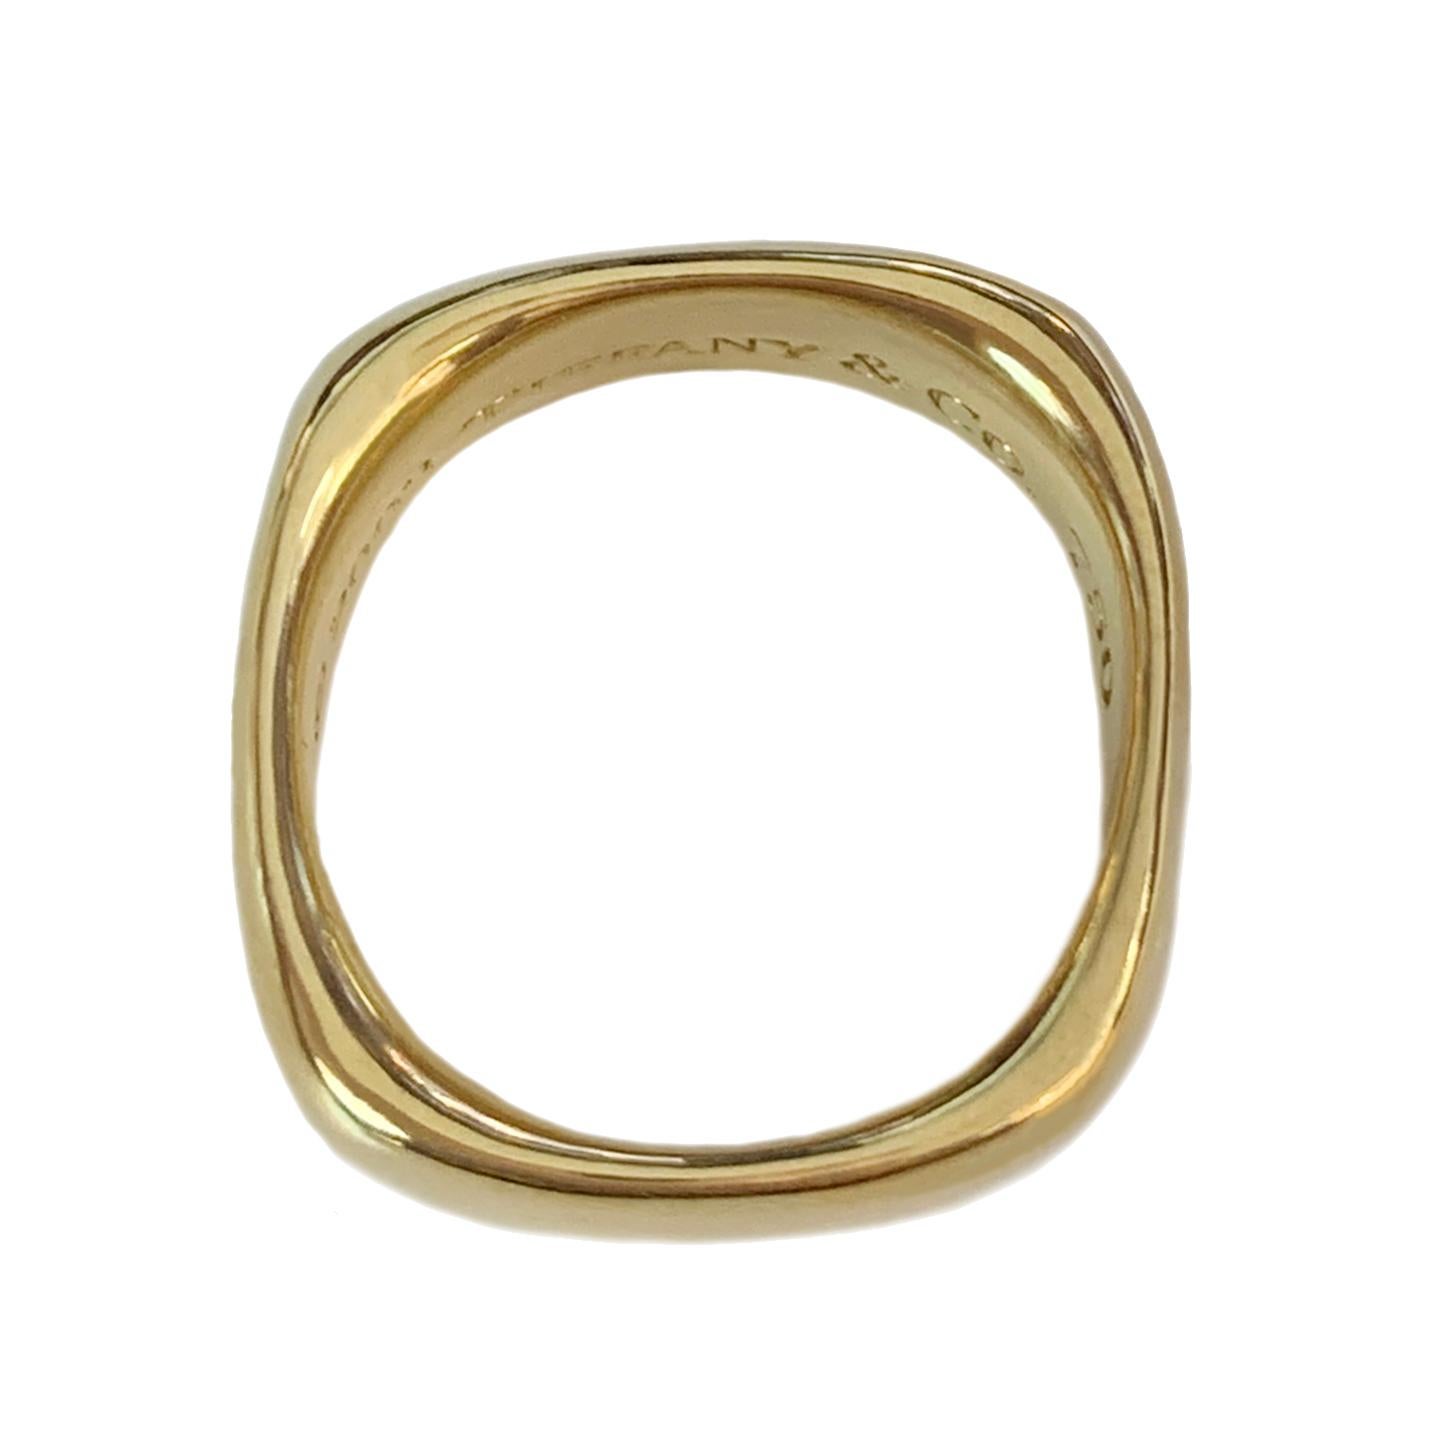 -Mint condition
-18k Yellow Gold
-Ring size: 6
-Width: 7.5mm
-Weight: 14.3gr
-Comes with Tiffany box